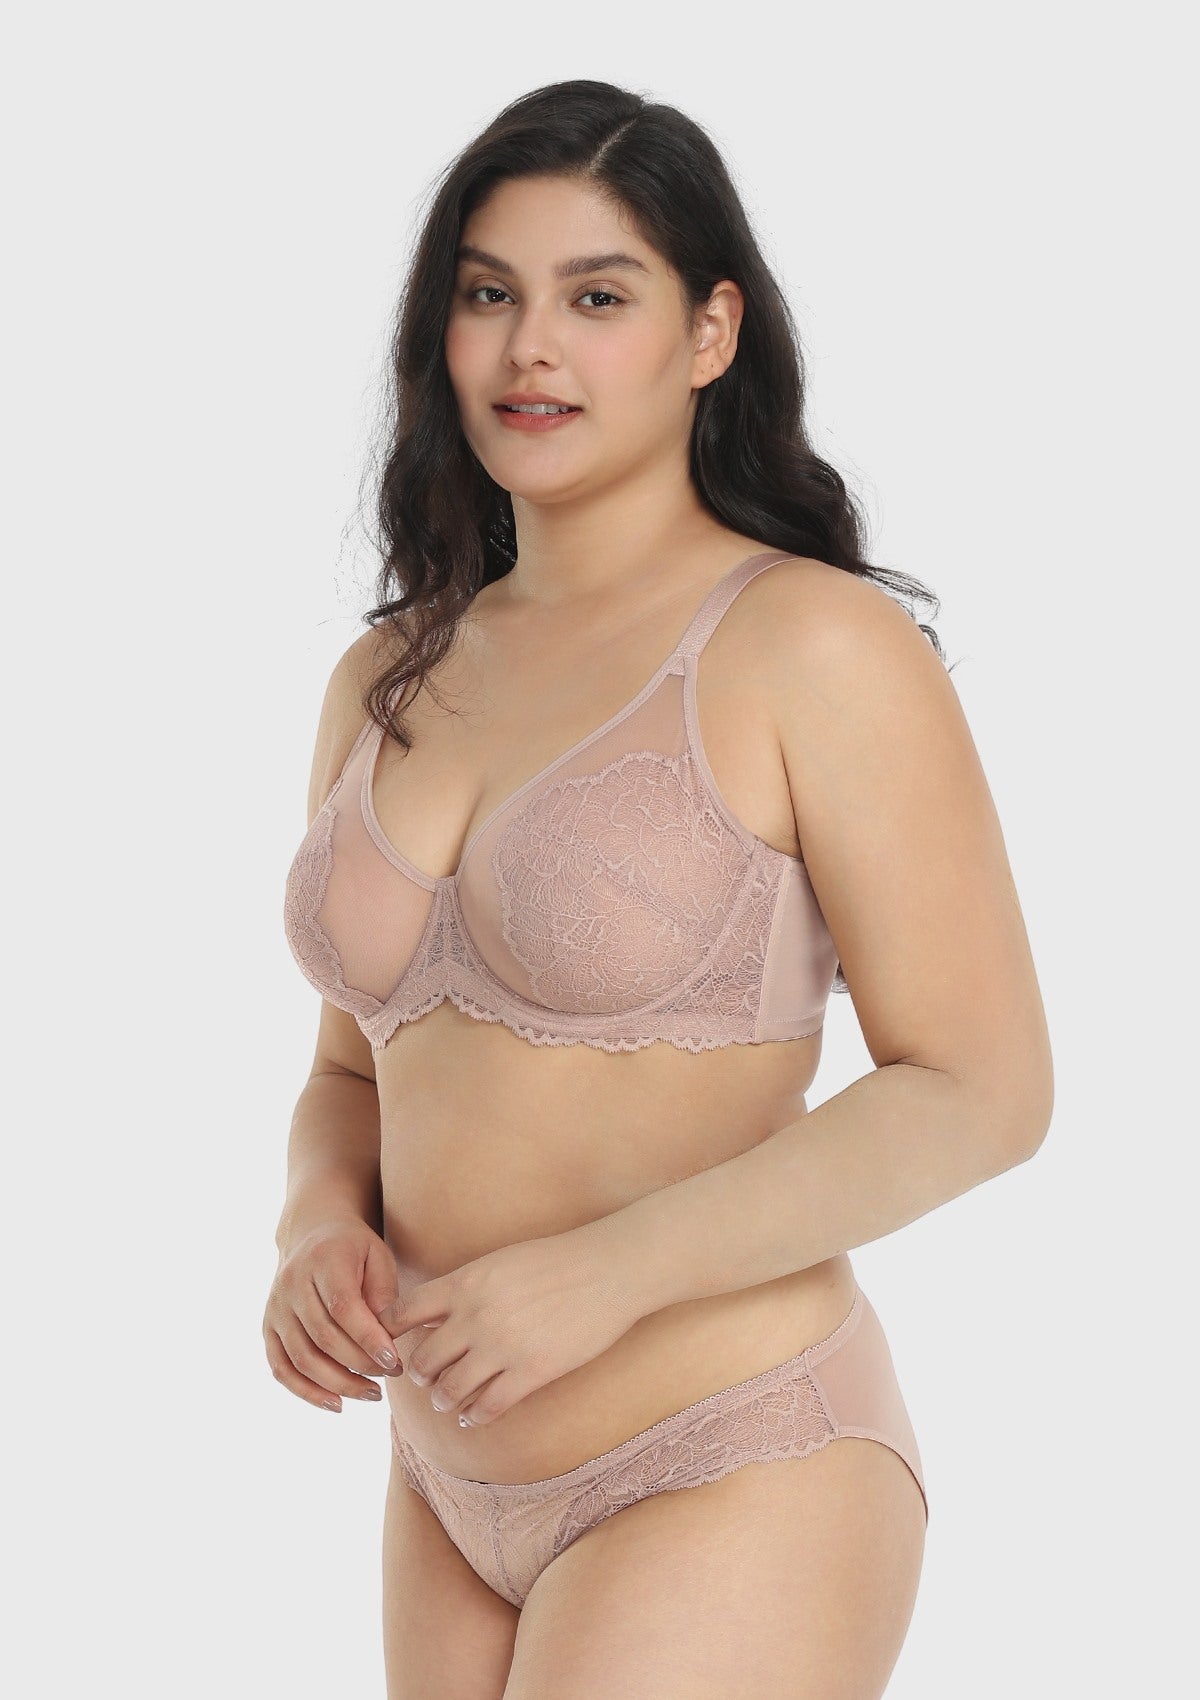 HSIA Blossom Plus Size Lace Bra - Wired, Unpadded, See-Through - Dark Pink / 40 / G